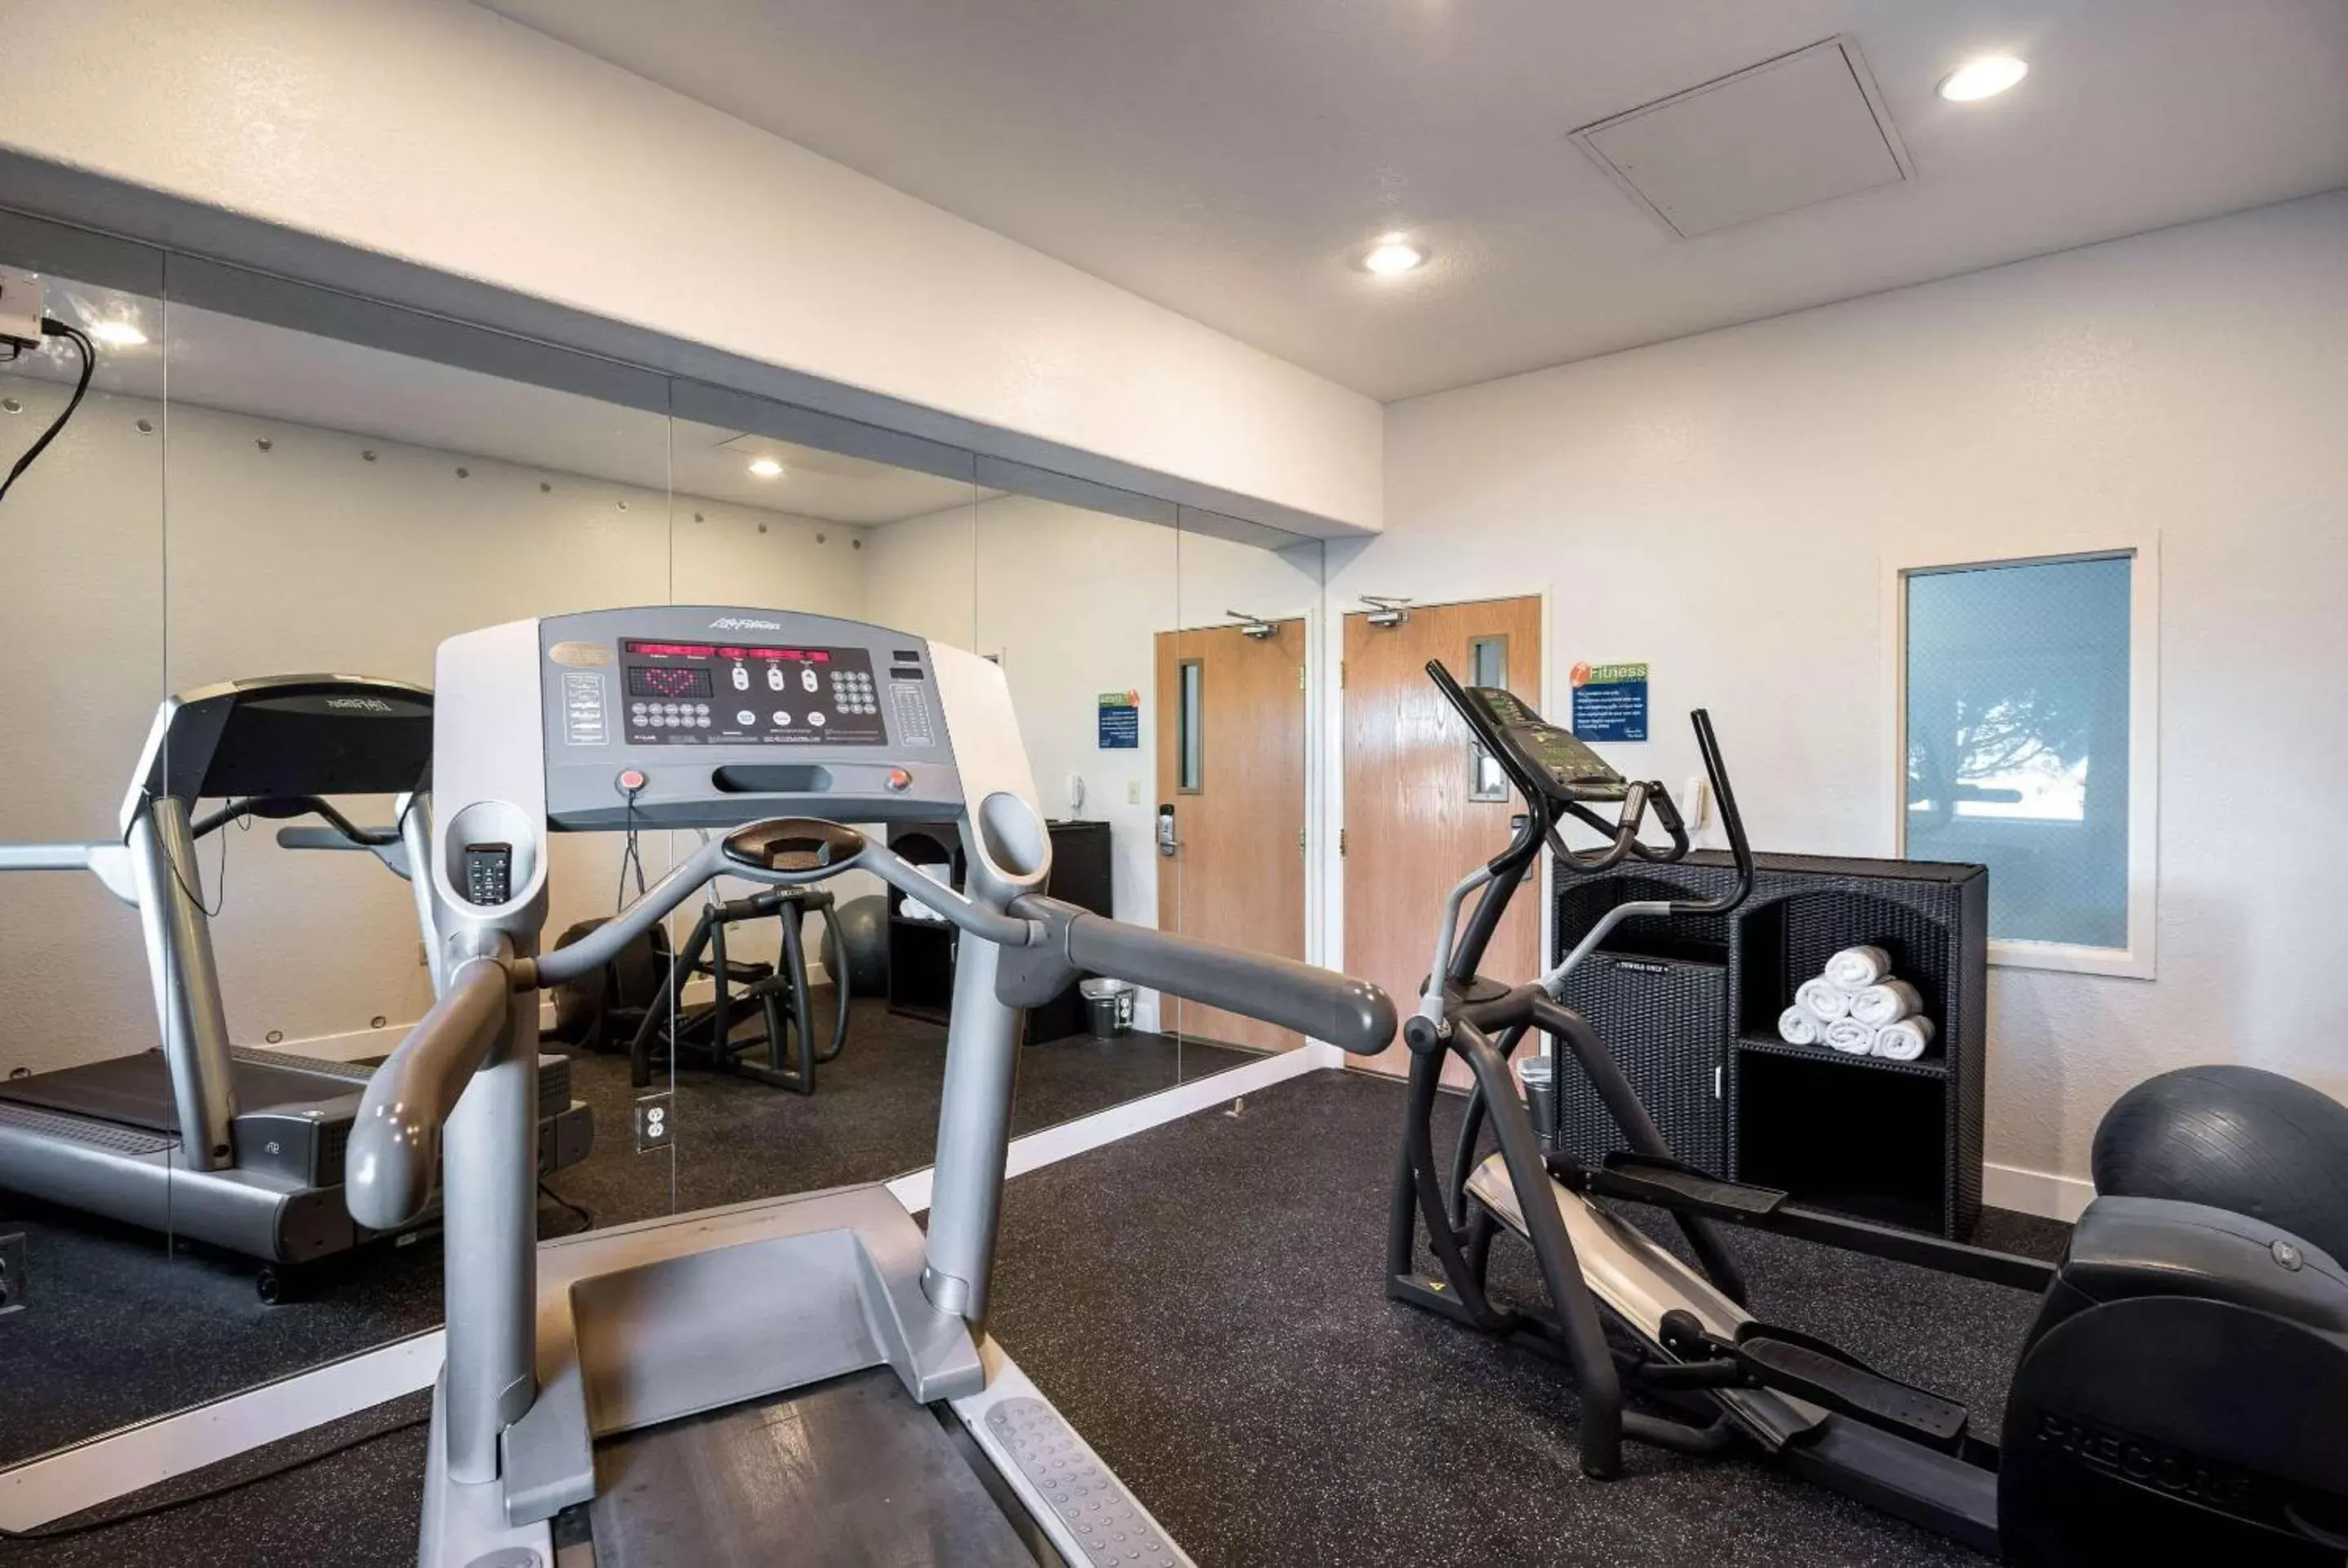 Fitness centre/facilities, Fitness Center/Facilities in Quality Inn & Suites West